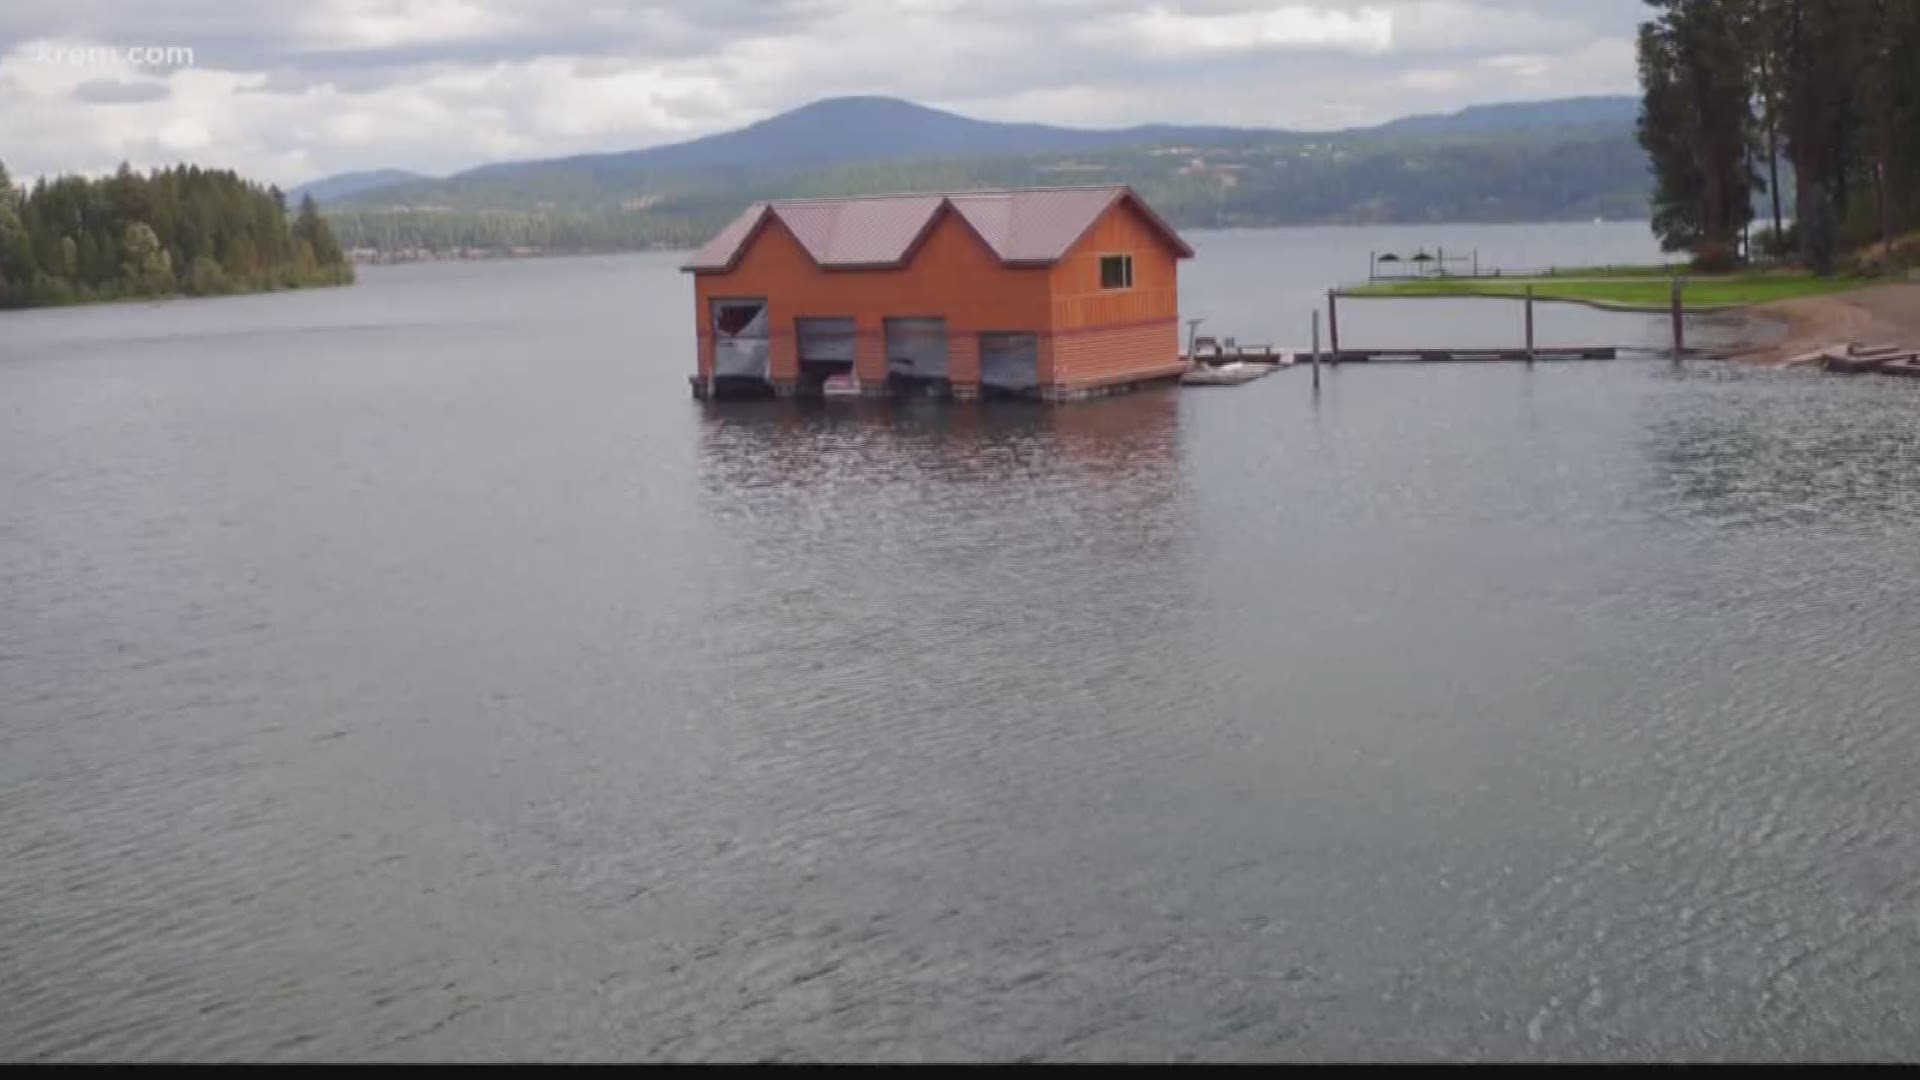 The two-story garage sitting on the shores of Everwell Bay in Coeur d'Alene has caused some issues among the neighbors there, who have argued that the garage is unsightly.